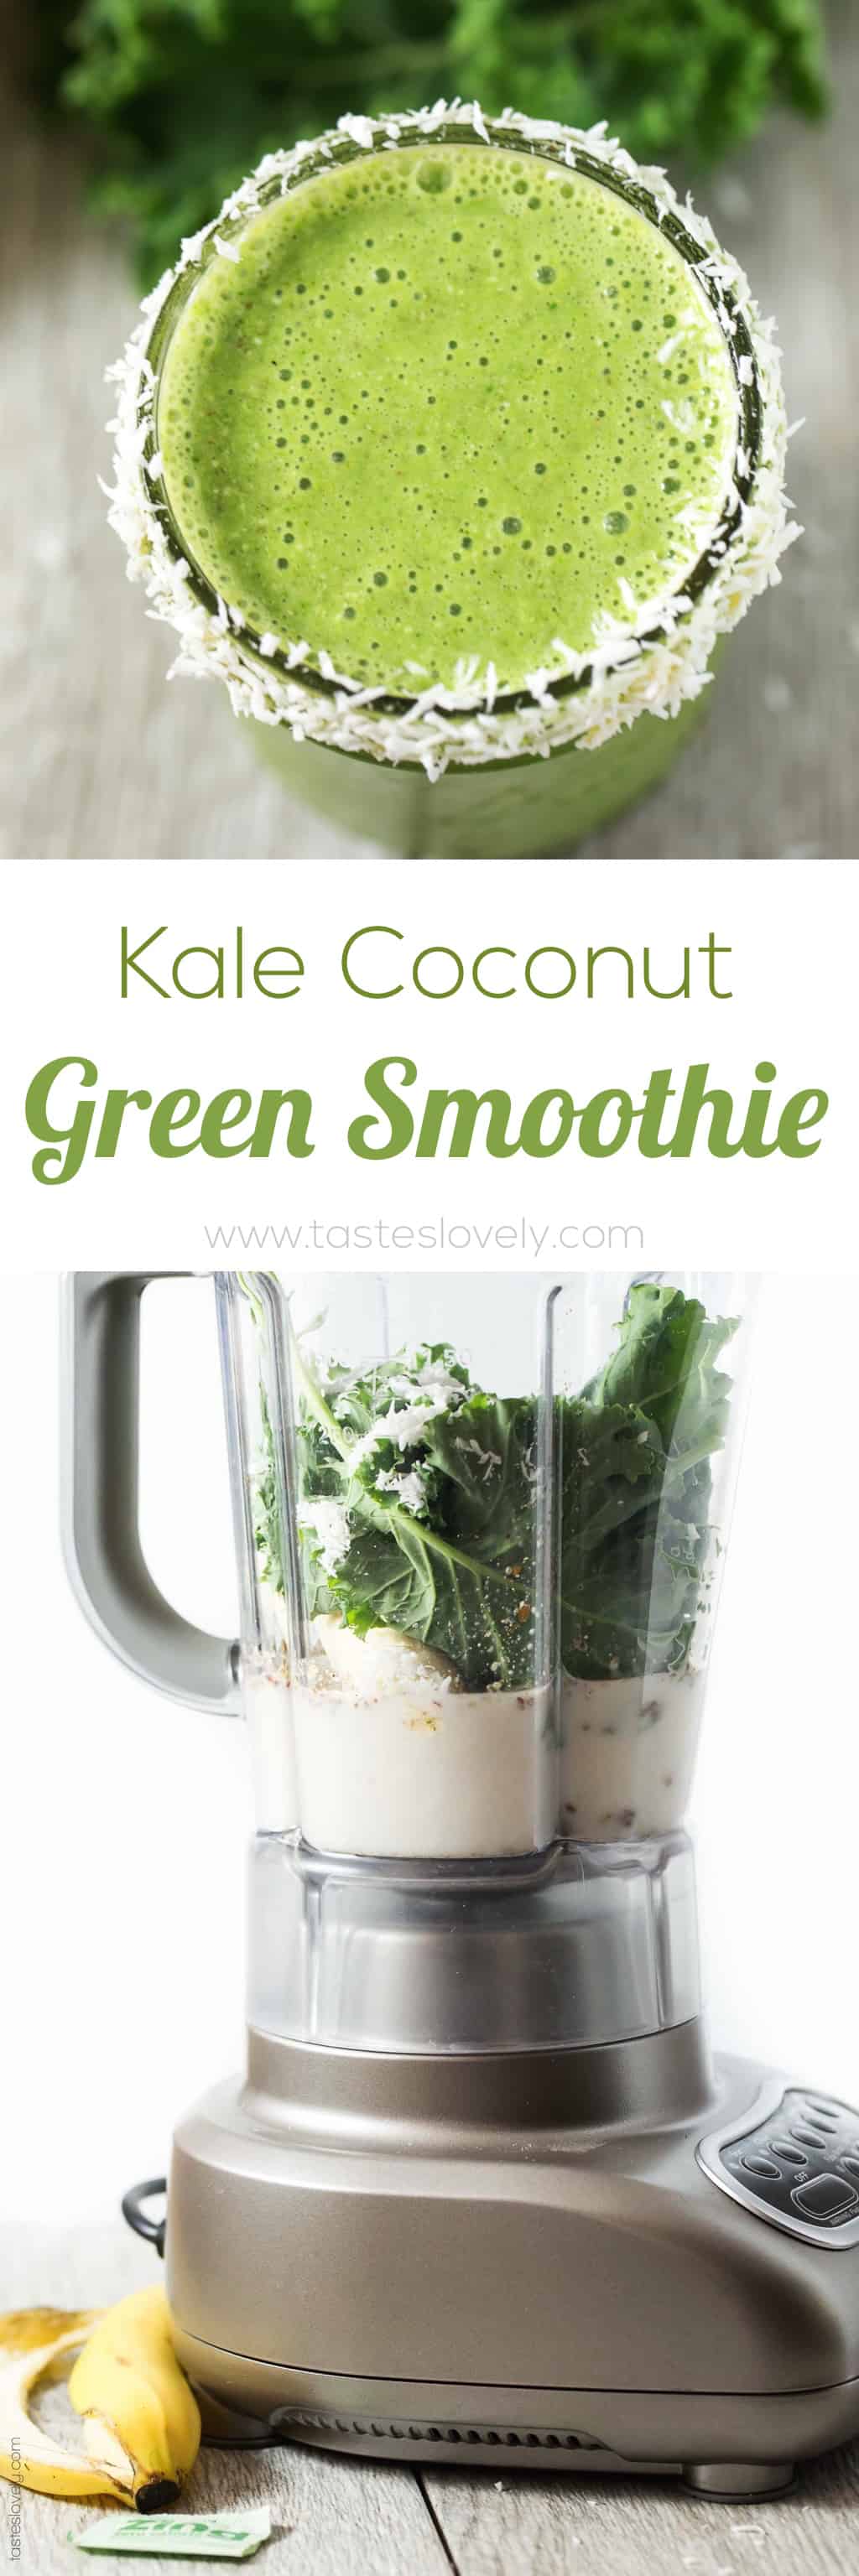 Kale Coconut Green Smoothie